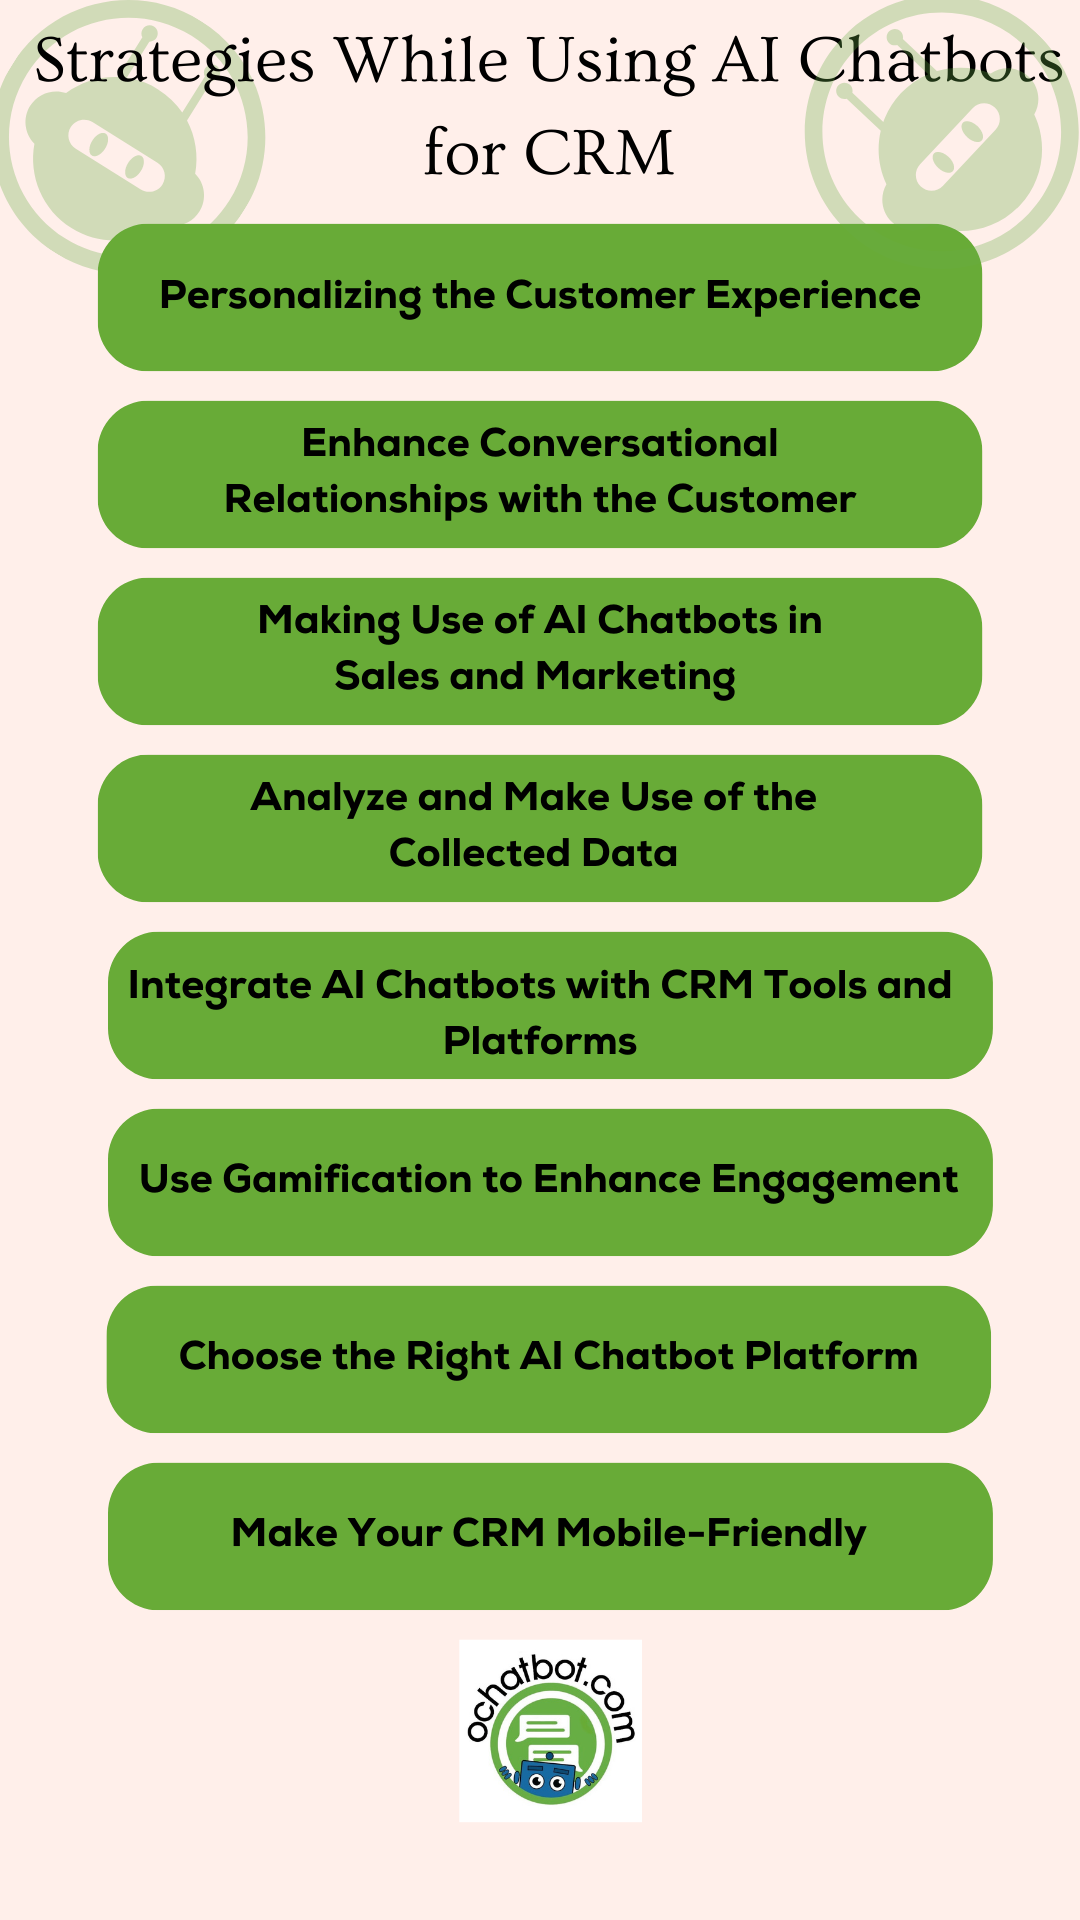 Strategies While Using AI Chatbots for CRM